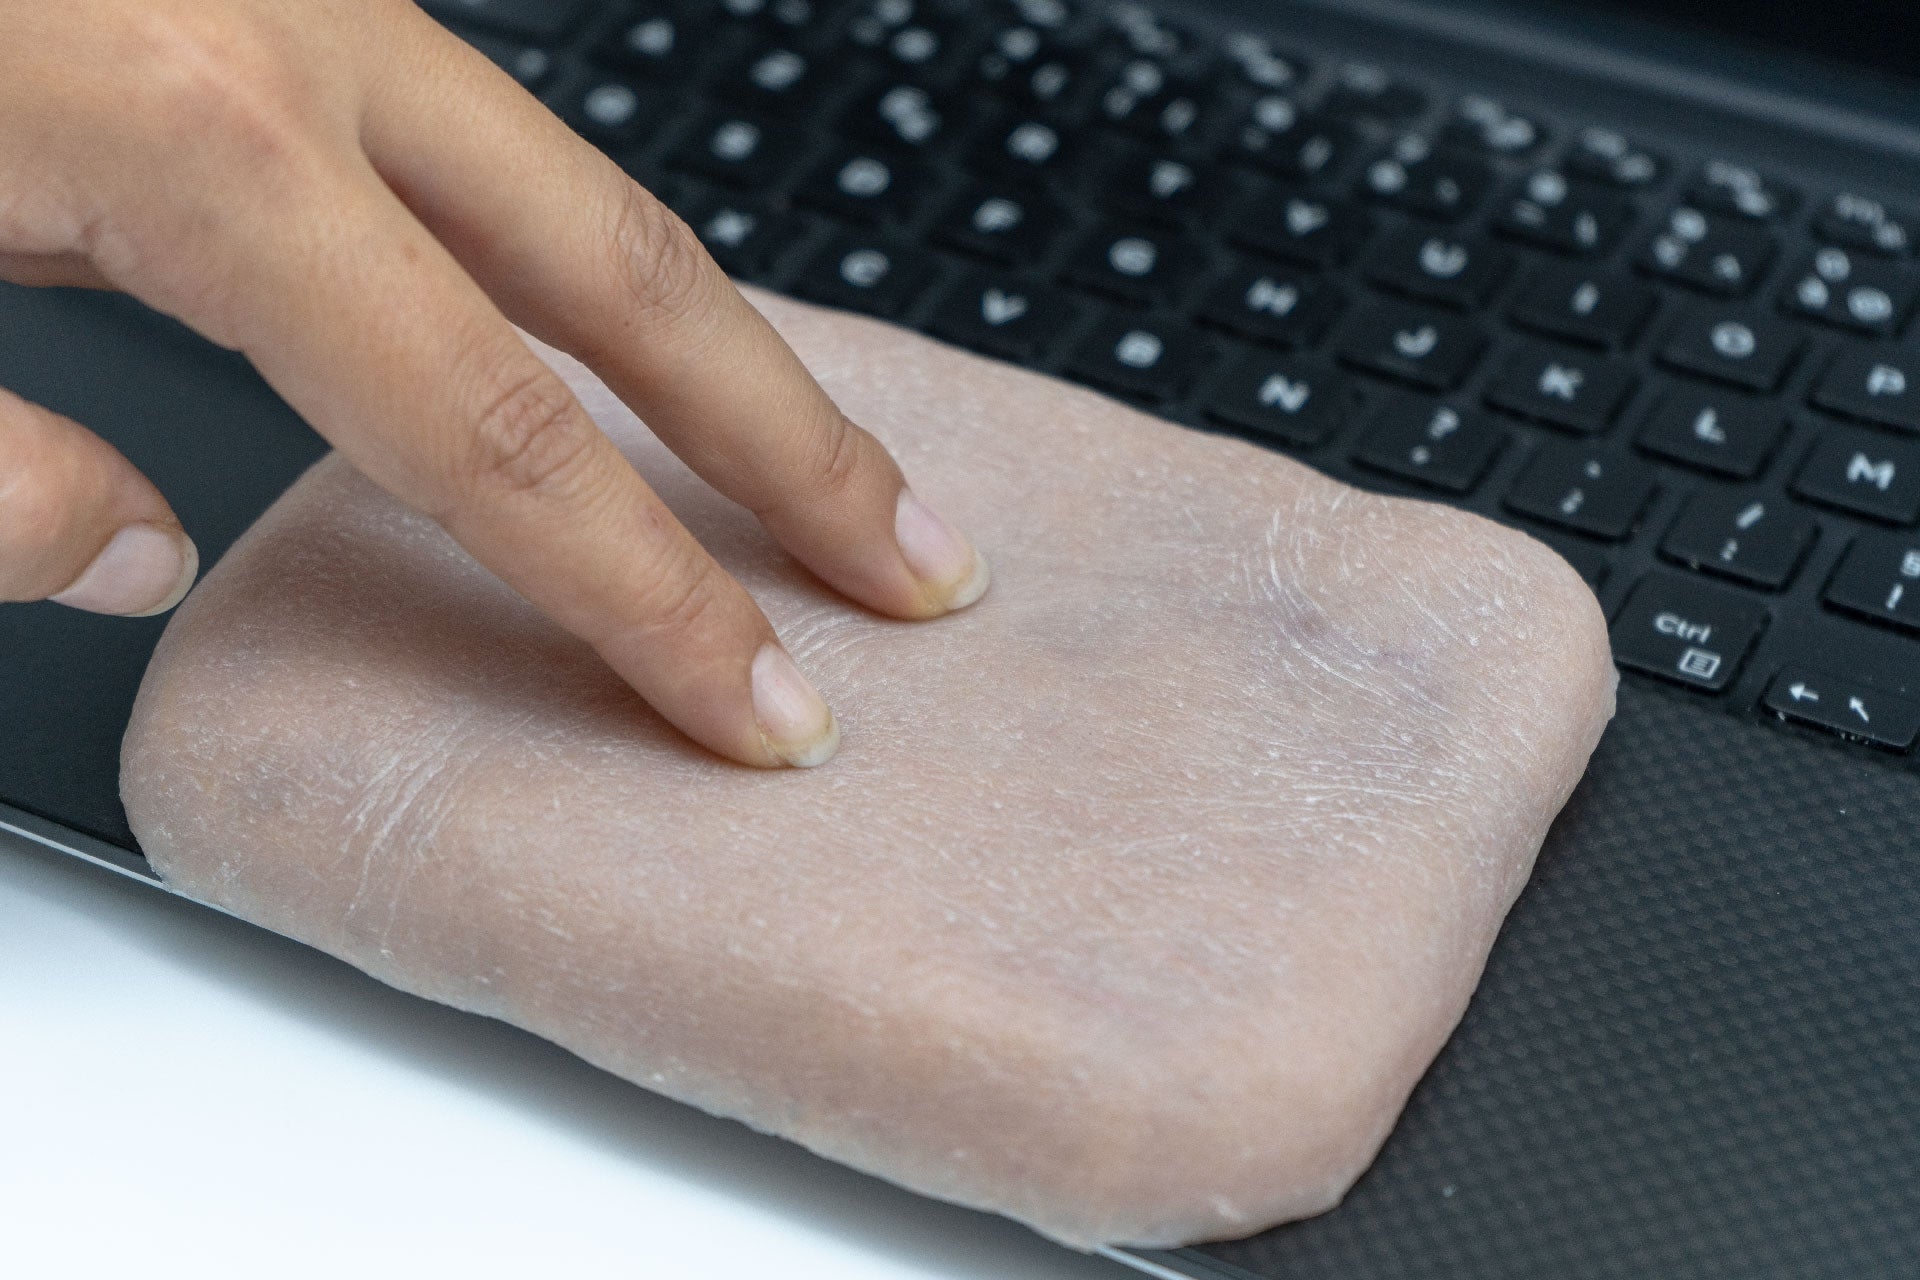 Scientists Create Artificial Skin That Could Make Smartphones